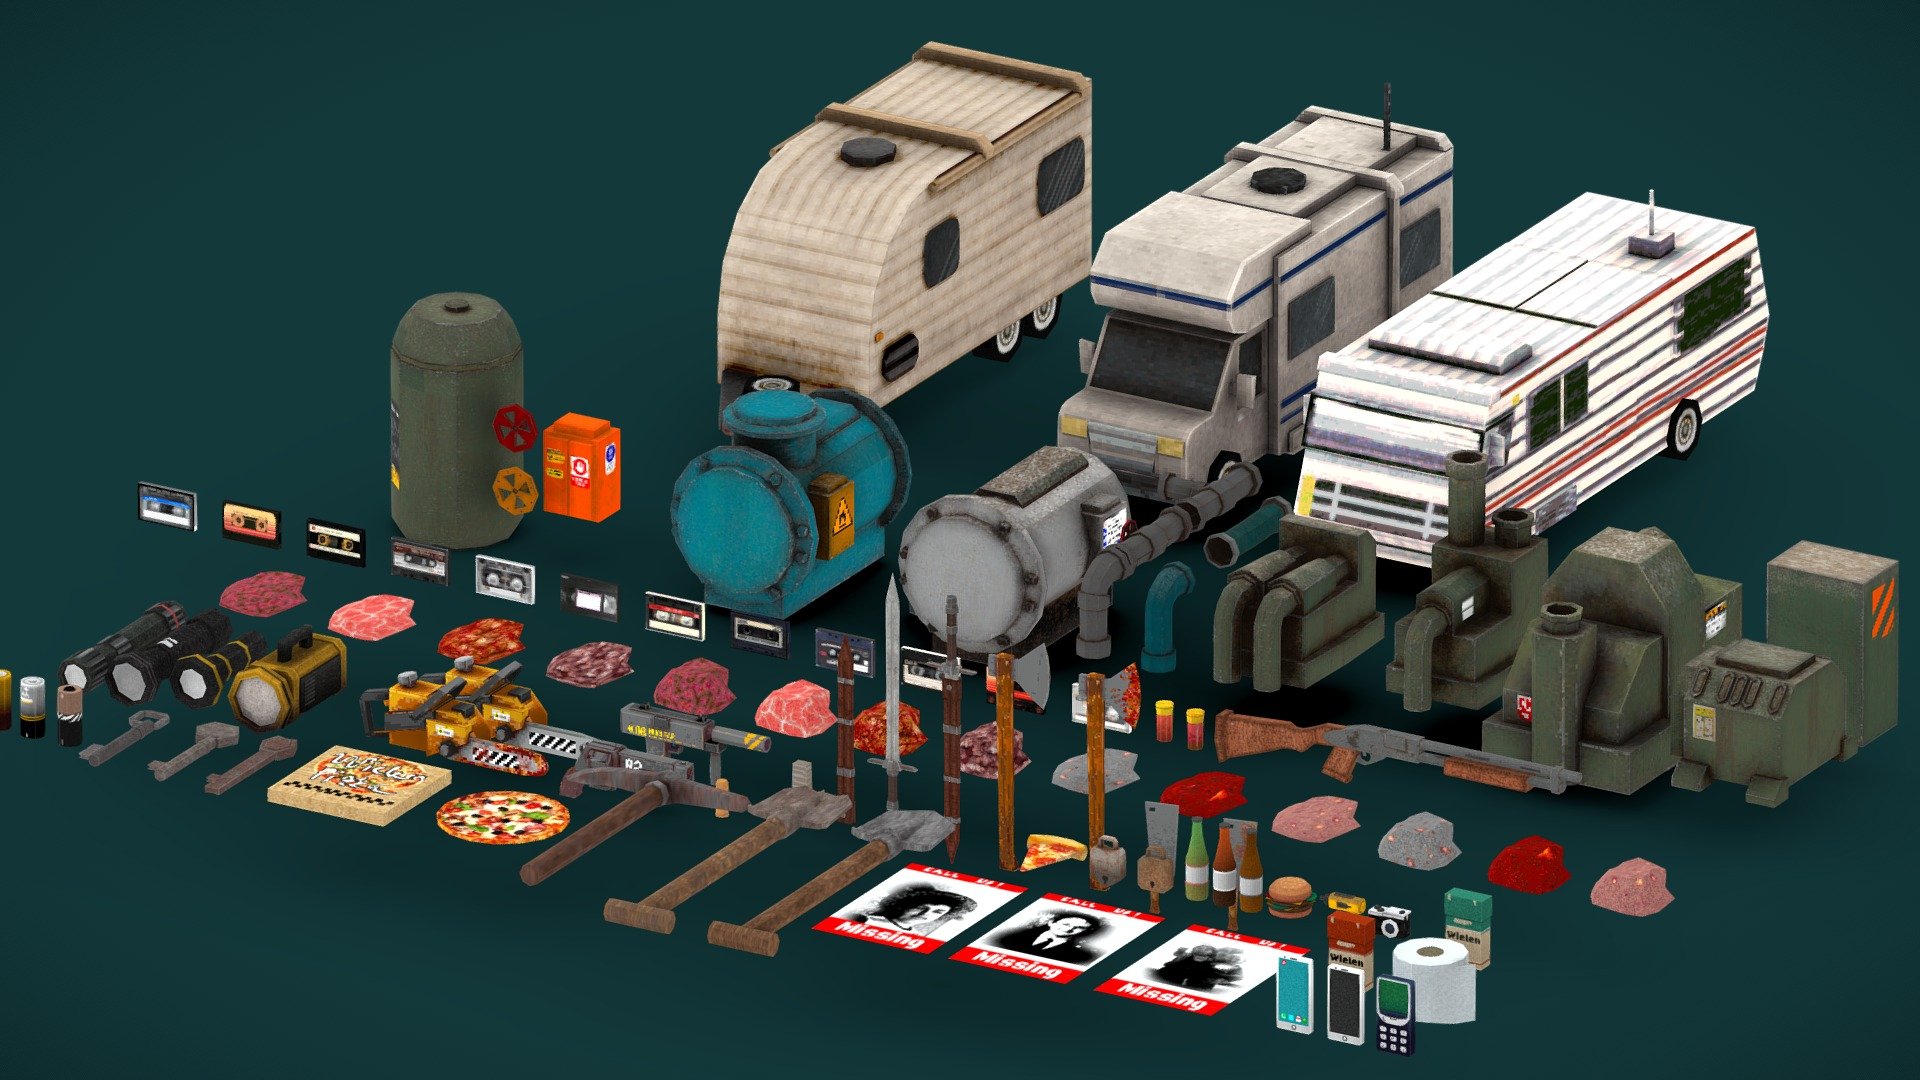 **This asset pack contains the following psx-like assets : **

In the viewer there are displayed only a part of the models.




RVS

Mechanical/Machinery/Generators

Cassette Tapes

Guns(Shotgun/Uzi/Handcannon/USP/Mauser,Flamethrower/Katana)

Meats/Flesh

Melee(Chainsaw/Axe/Cleaver/Sword)

Deadly Traps

Misc Items(Guitars,flashlights)

I am going to add more assets to this pack :) - PSX-Megapack - Buy Royalty Free 3D model by wildenza 3d model